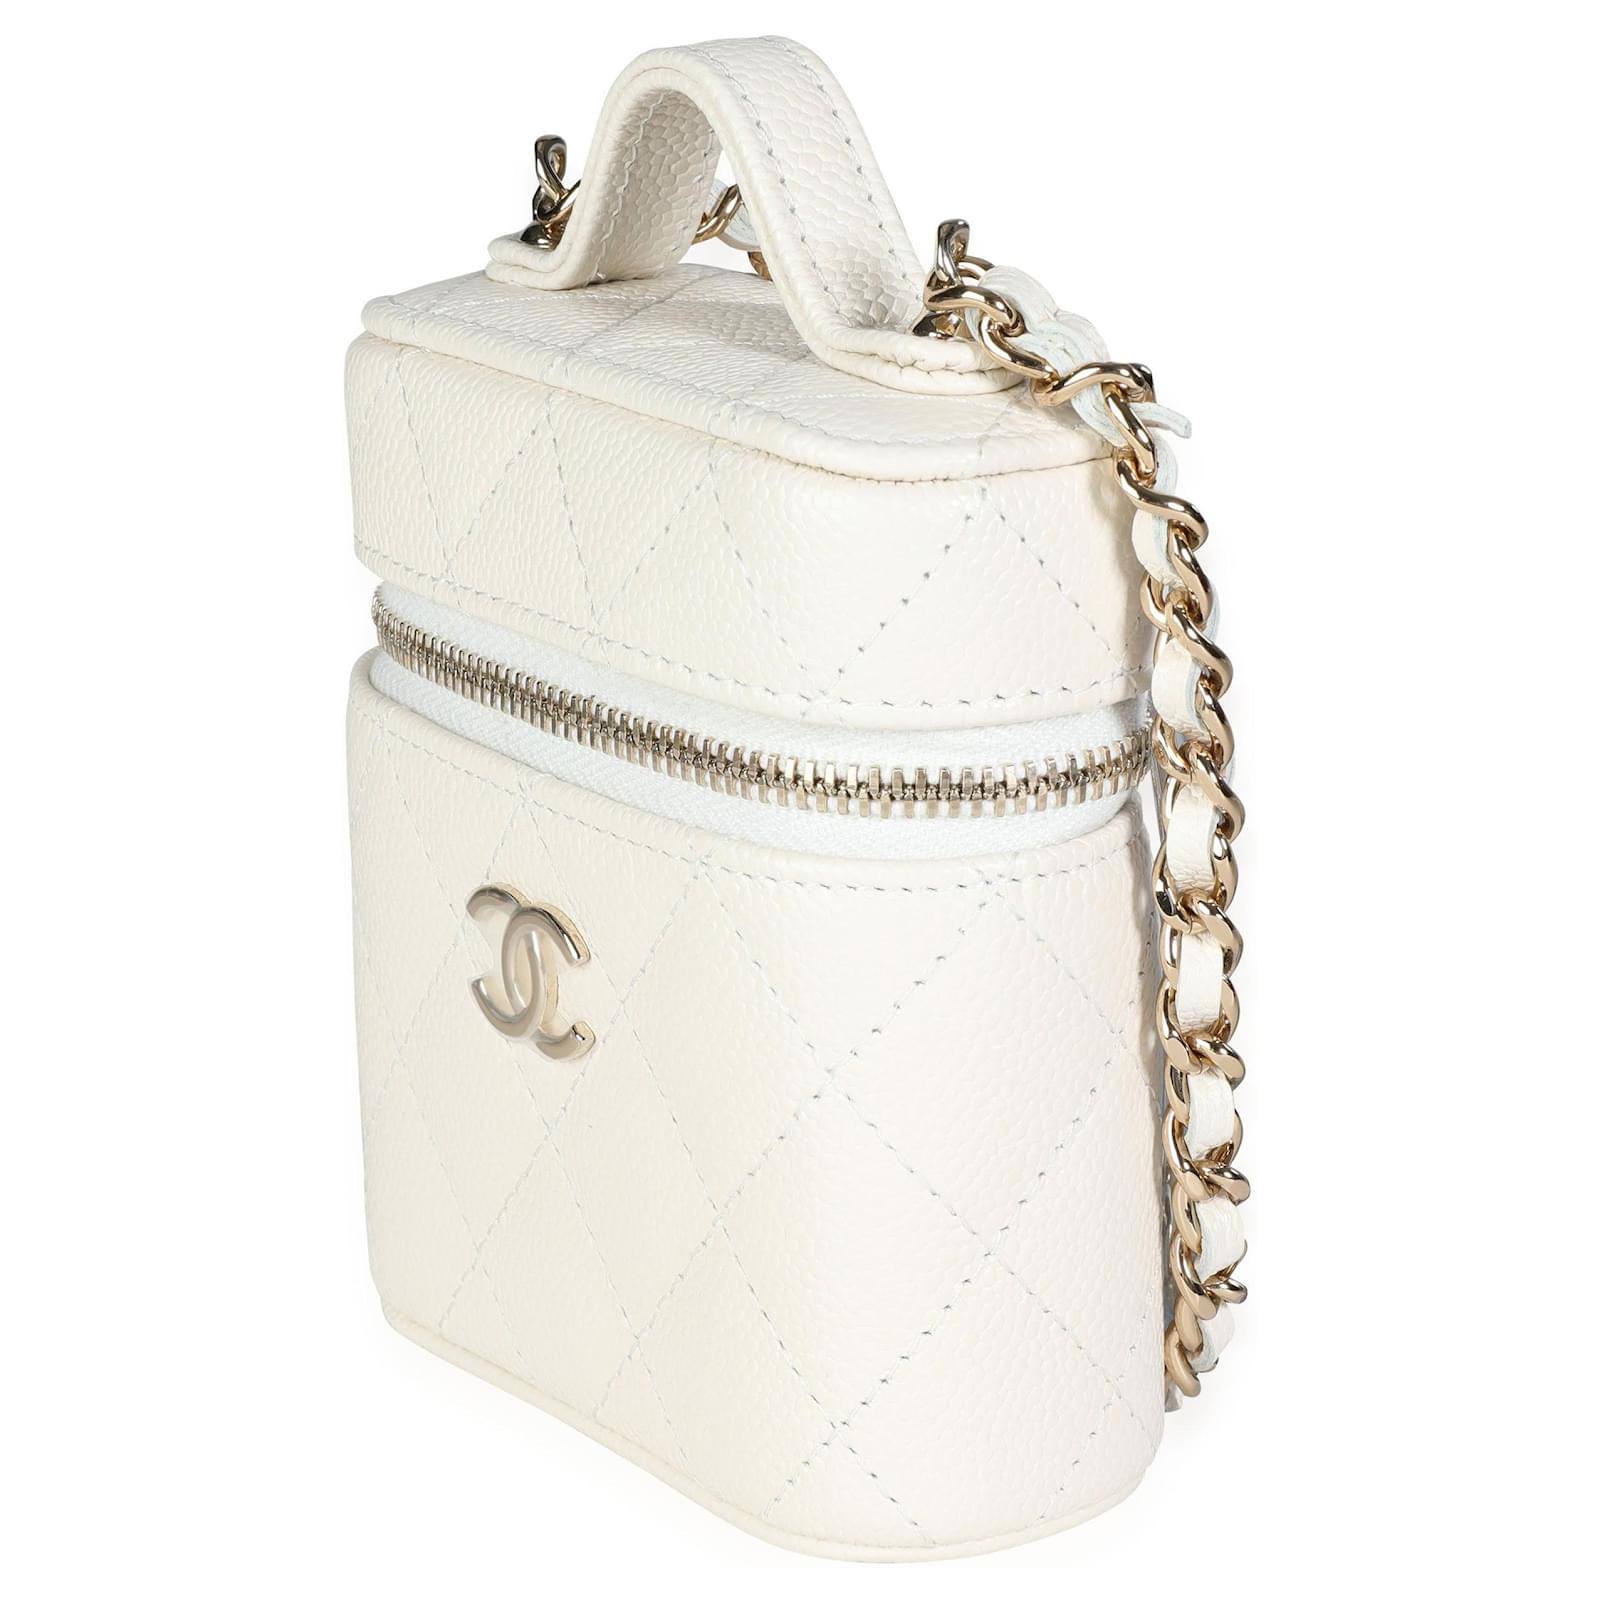 Chanel Creme Quilted Caviar Mini Vanity Case White Leather ref